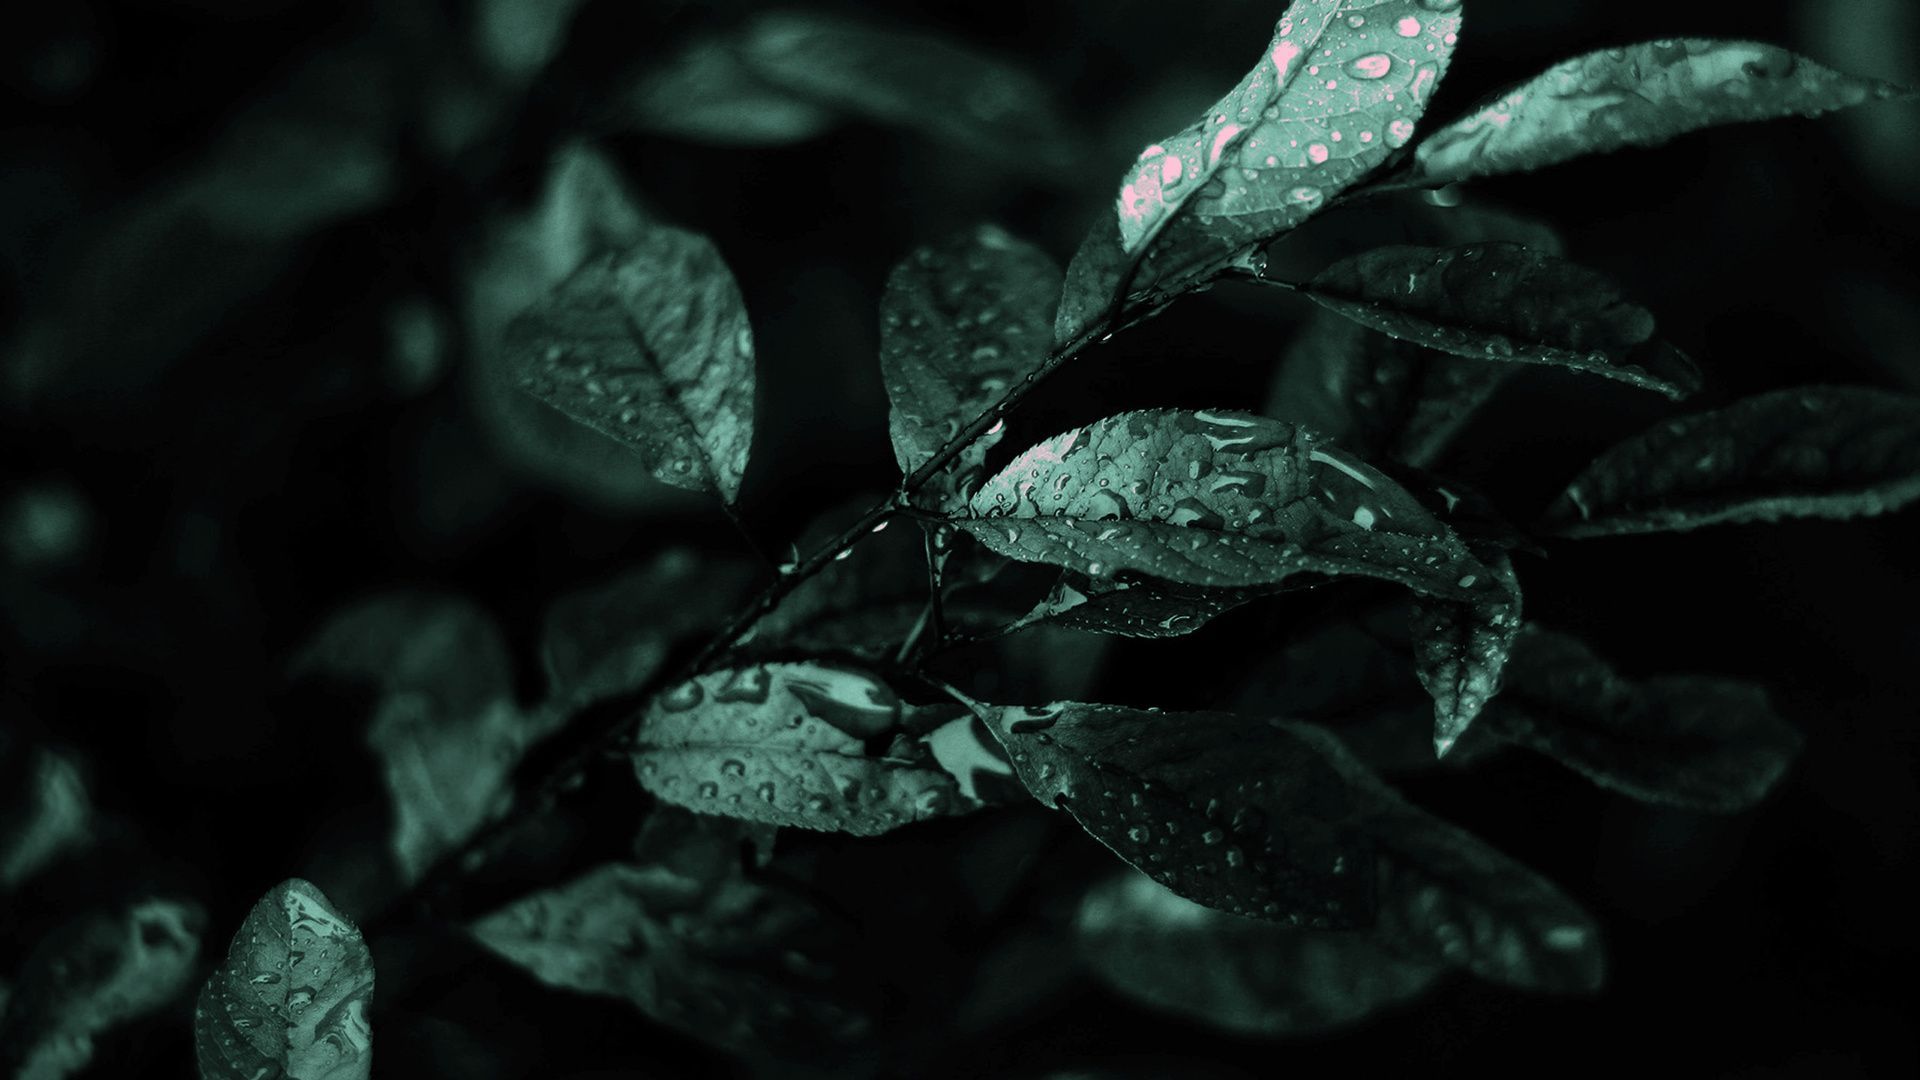 Download Dark Leaves Leaf Water Drop Water Bead Plant wallpaper, Download 1920x1080 Nature Other wallpaper. Green nature, Nature wallpaper, Slytherin wallpaper